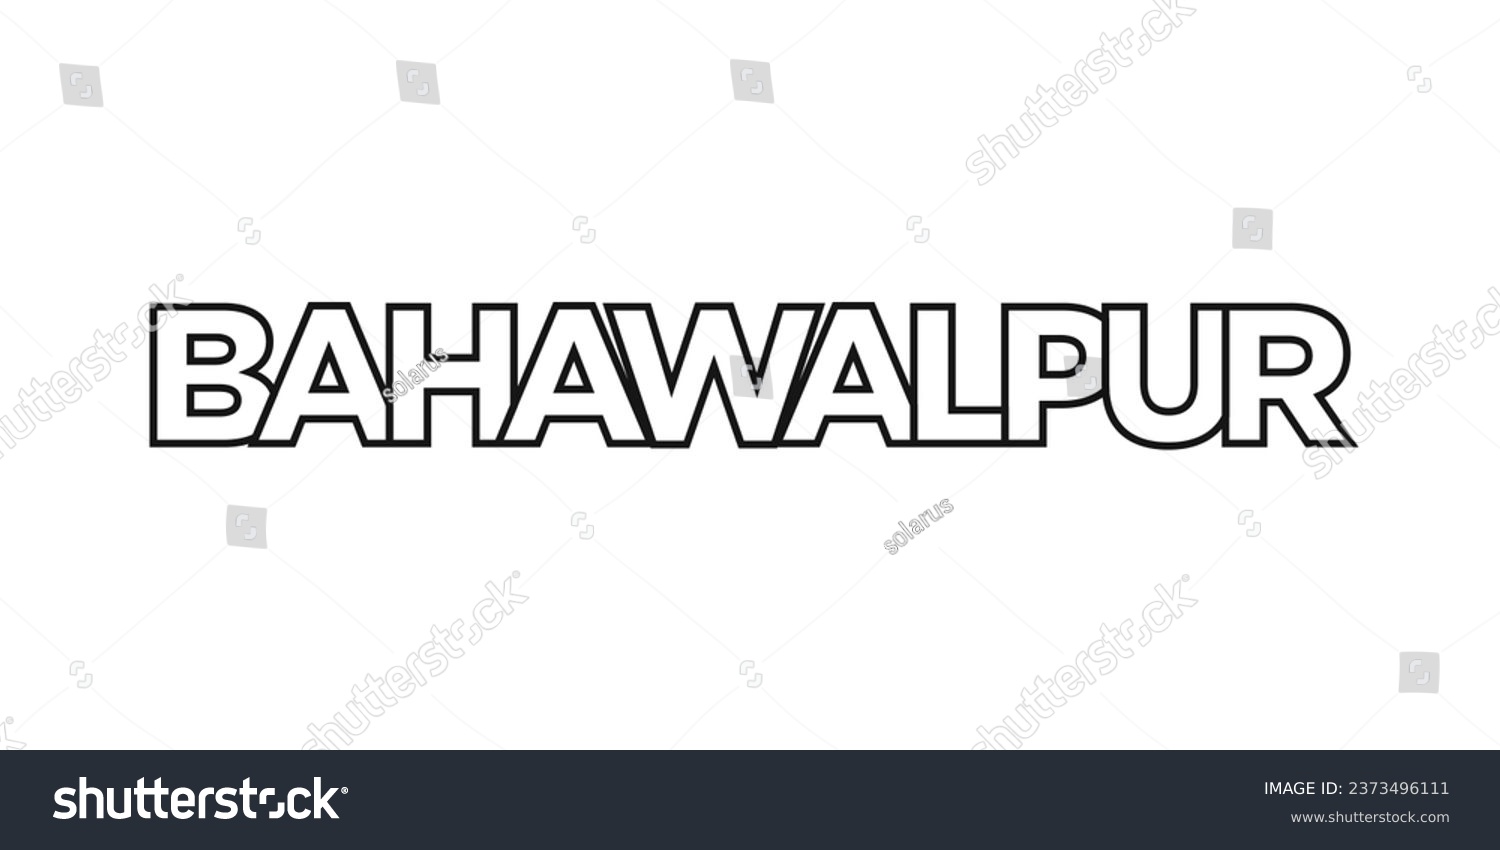 SVG of Bahawalpur in the Pakistan emblem for print and web. Design features geometric style, vector illustration with bold typography in modern font. Graphic slogan lettering isolated on white background. svg